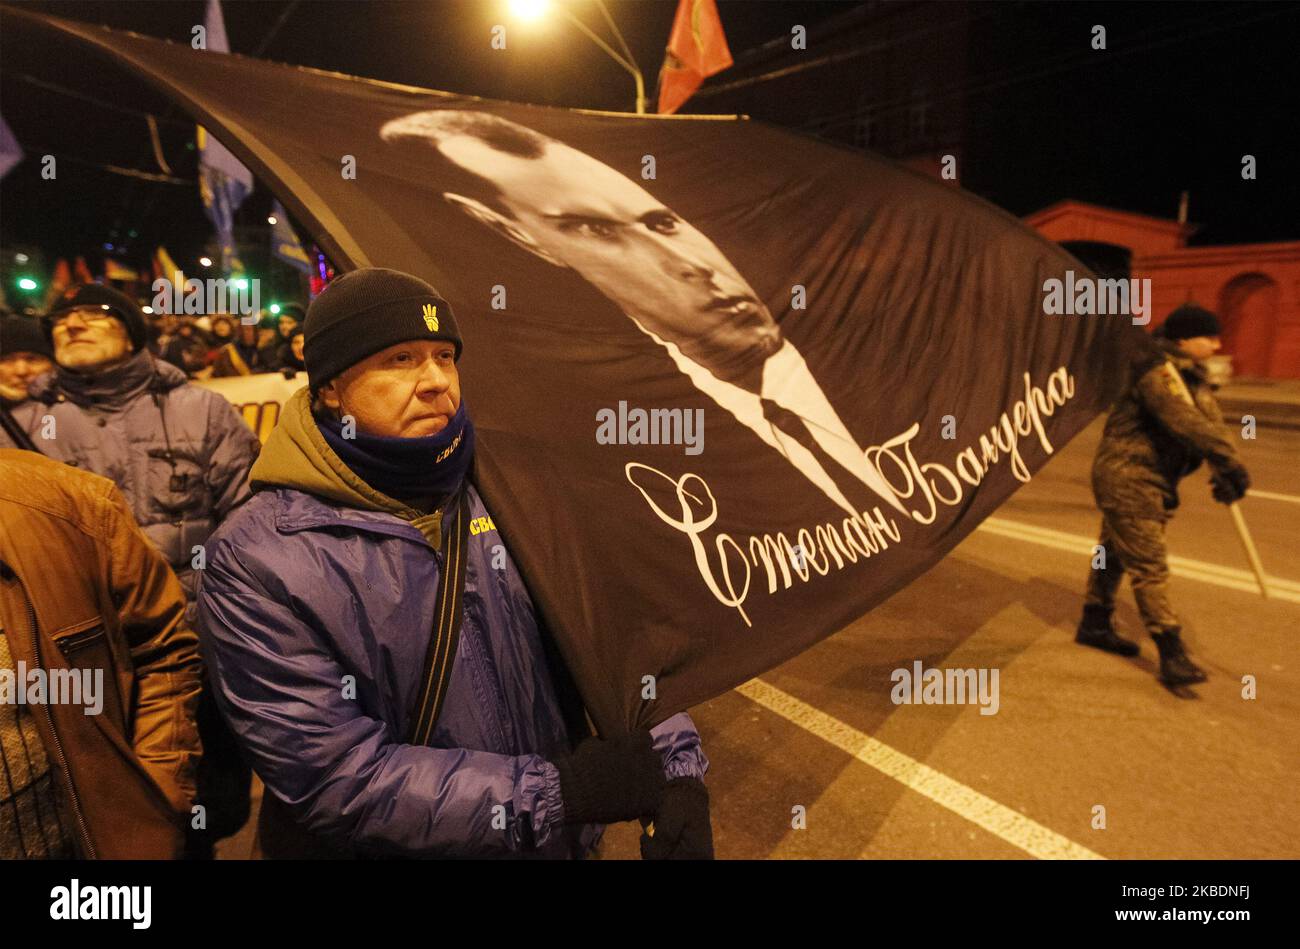 Ukrainians carry a banner with Stepan Bandera portrait during a torchlight procession dedicated to the 111th of Stepan Bandera birthday in center of Kyiv, Ukraine, on 1 January 2020. Members and supporters of 'Svoboda' ('Freedom') nationalistic party attended the torch march to mark leader and ideologist of Ukrainian national movement Stepan Bandera birthday. (Photo by STR/NurPhoto) Stock Photo